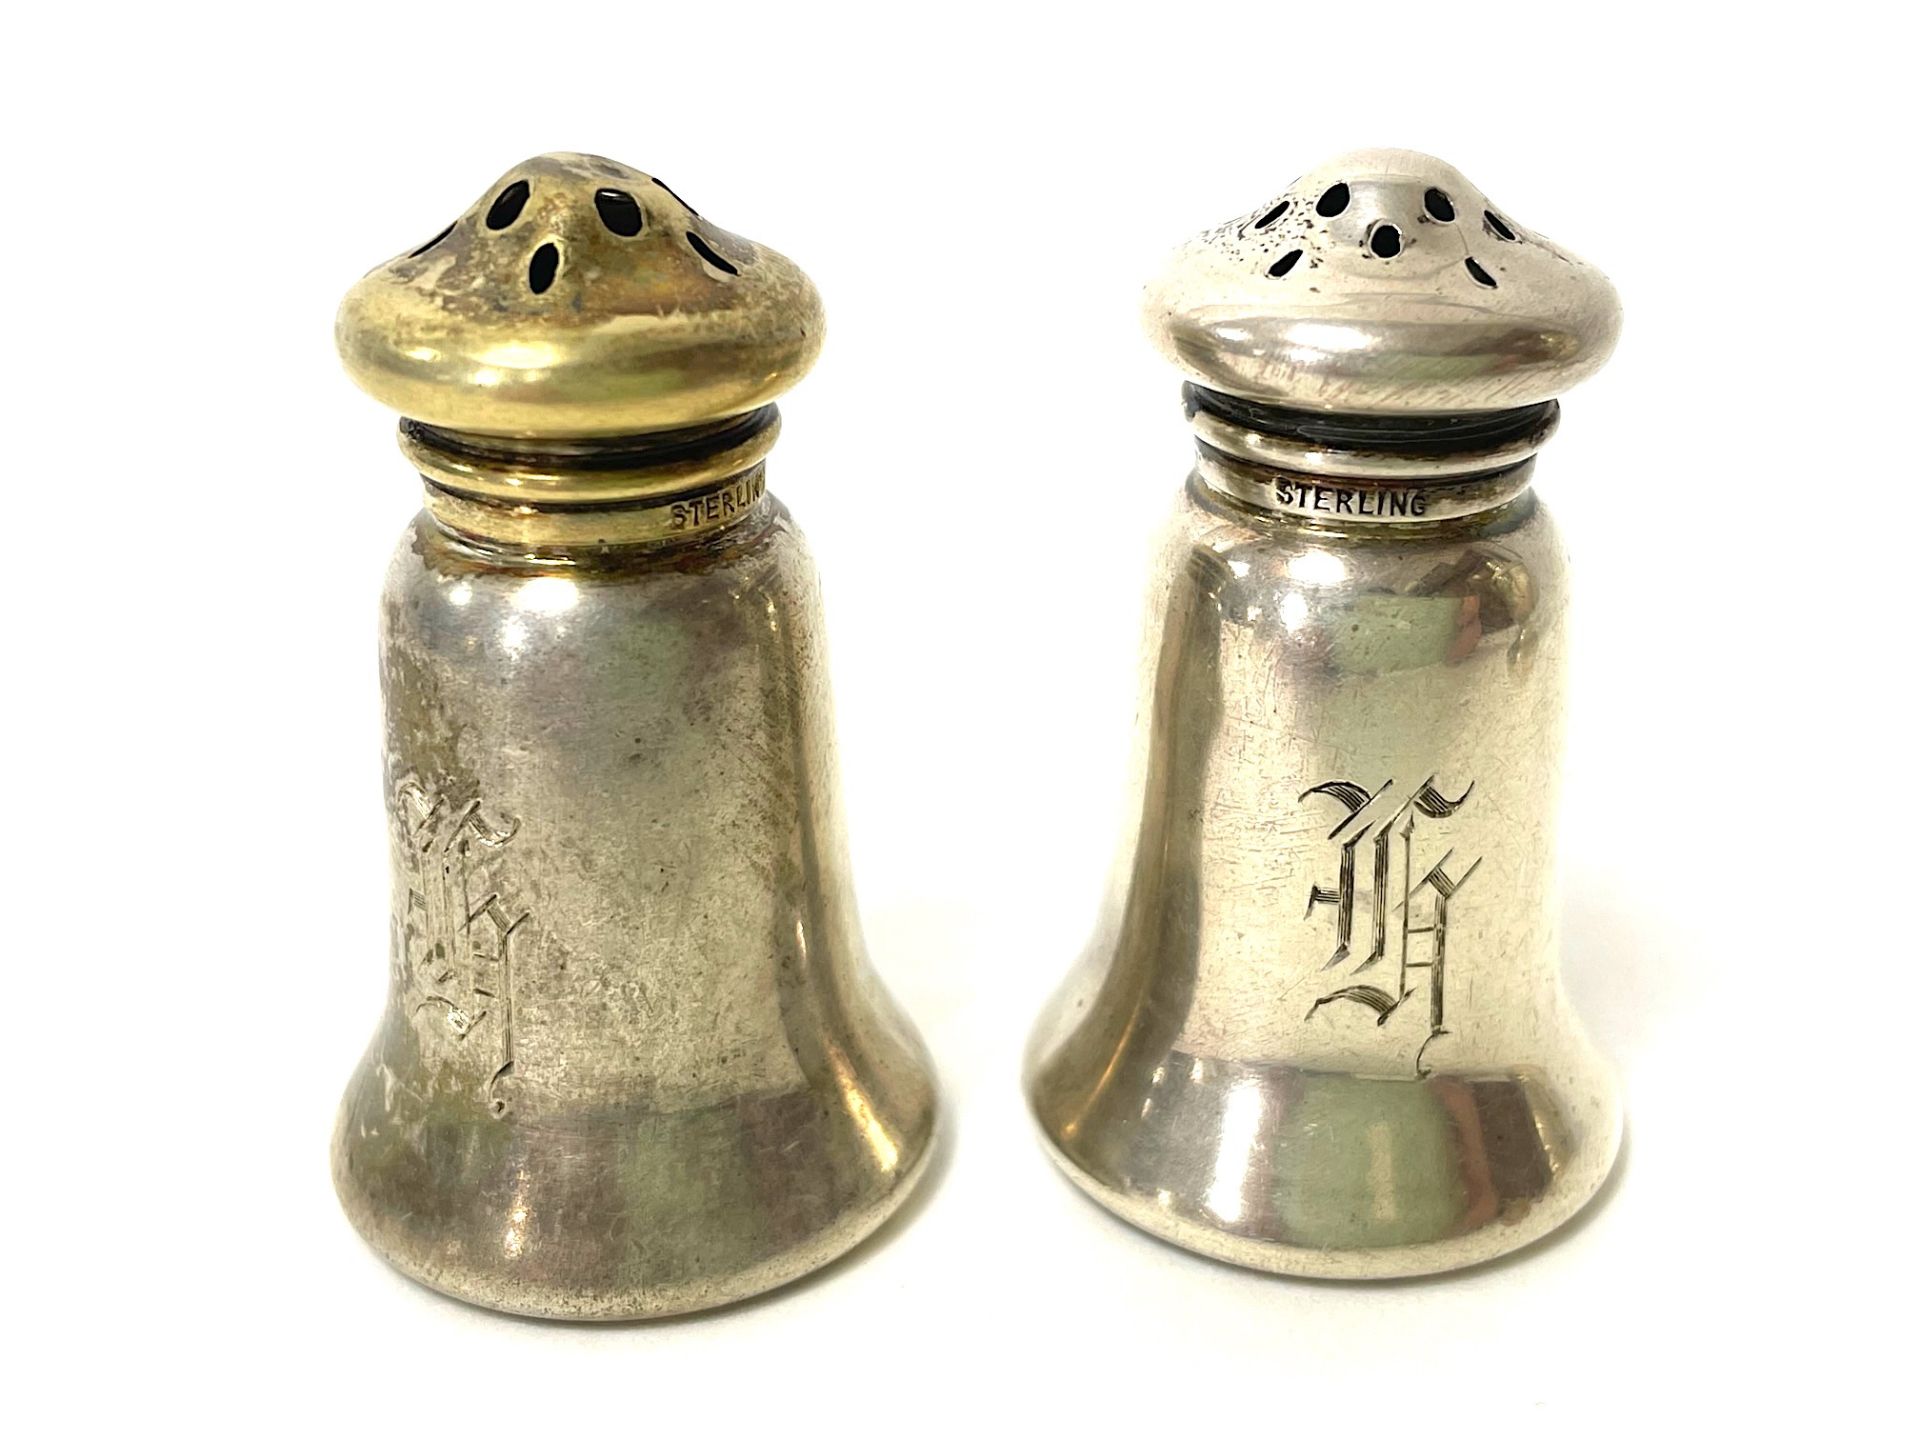 40 pairs of salt/pepper and spice shakers, - Image 13 of 88